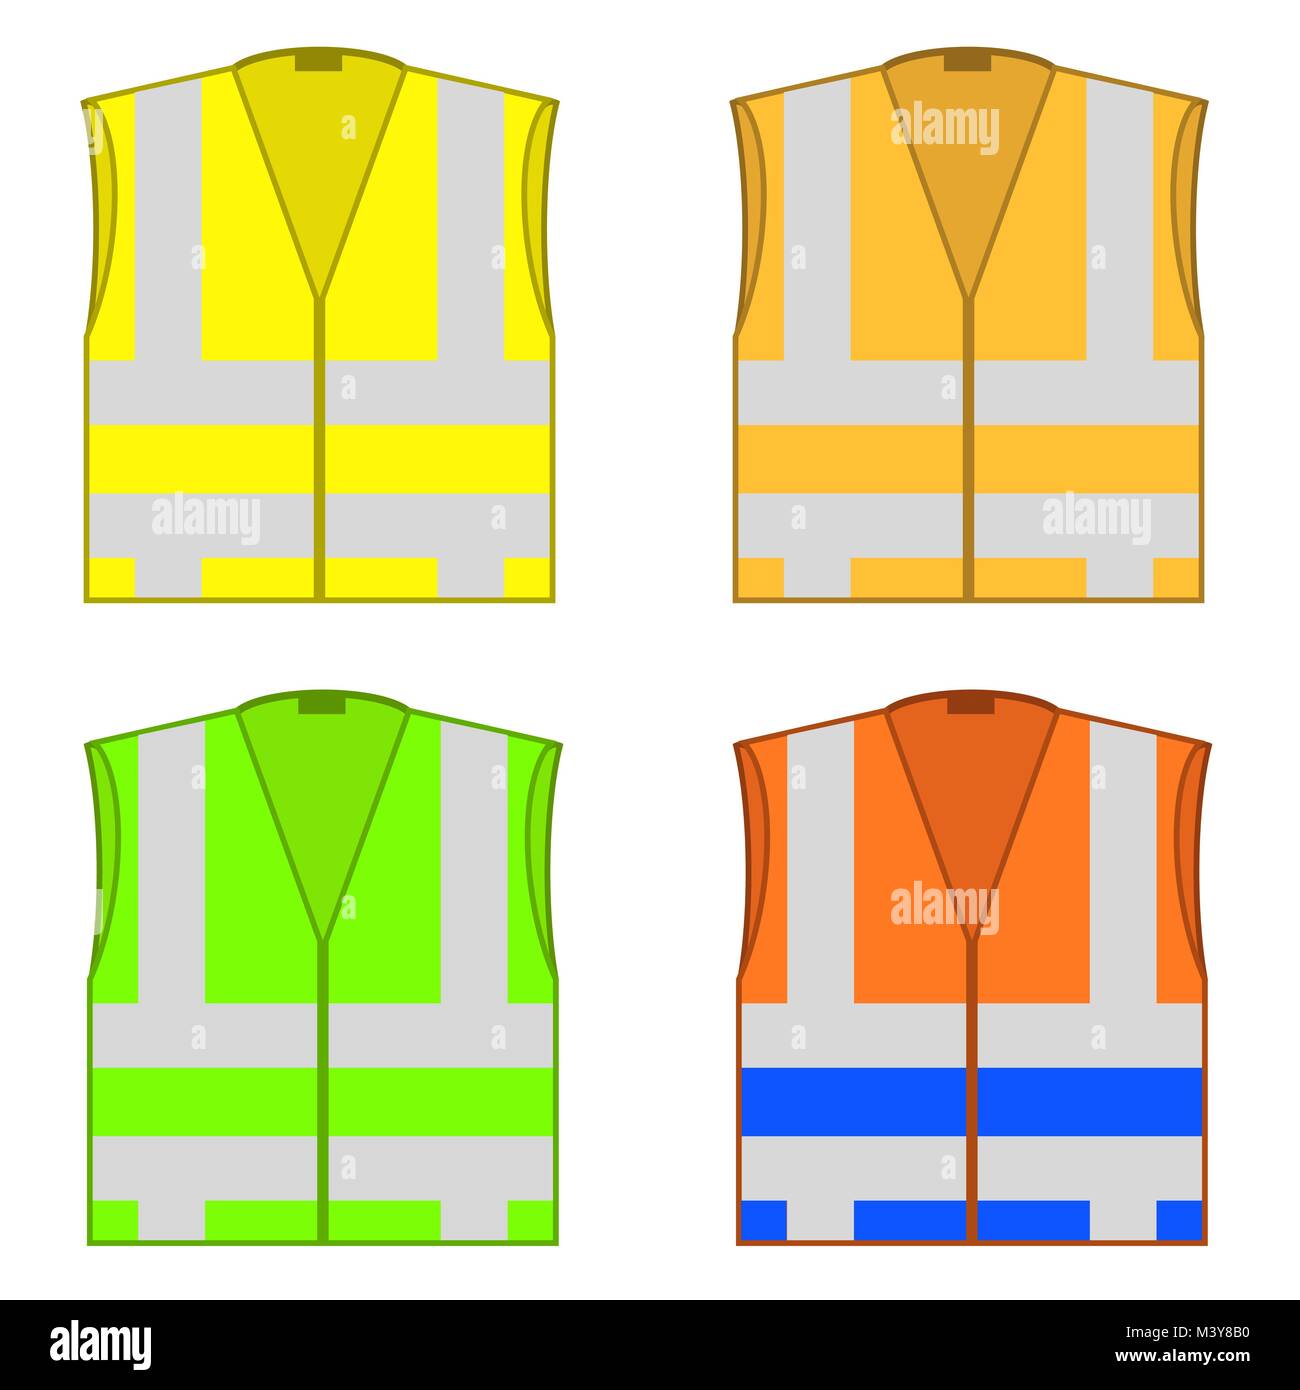 Colorful Safety Jackets. Protective Workwear for Work. Road Vests with Stripes. Professional High-visibility Clothes Stock Vector